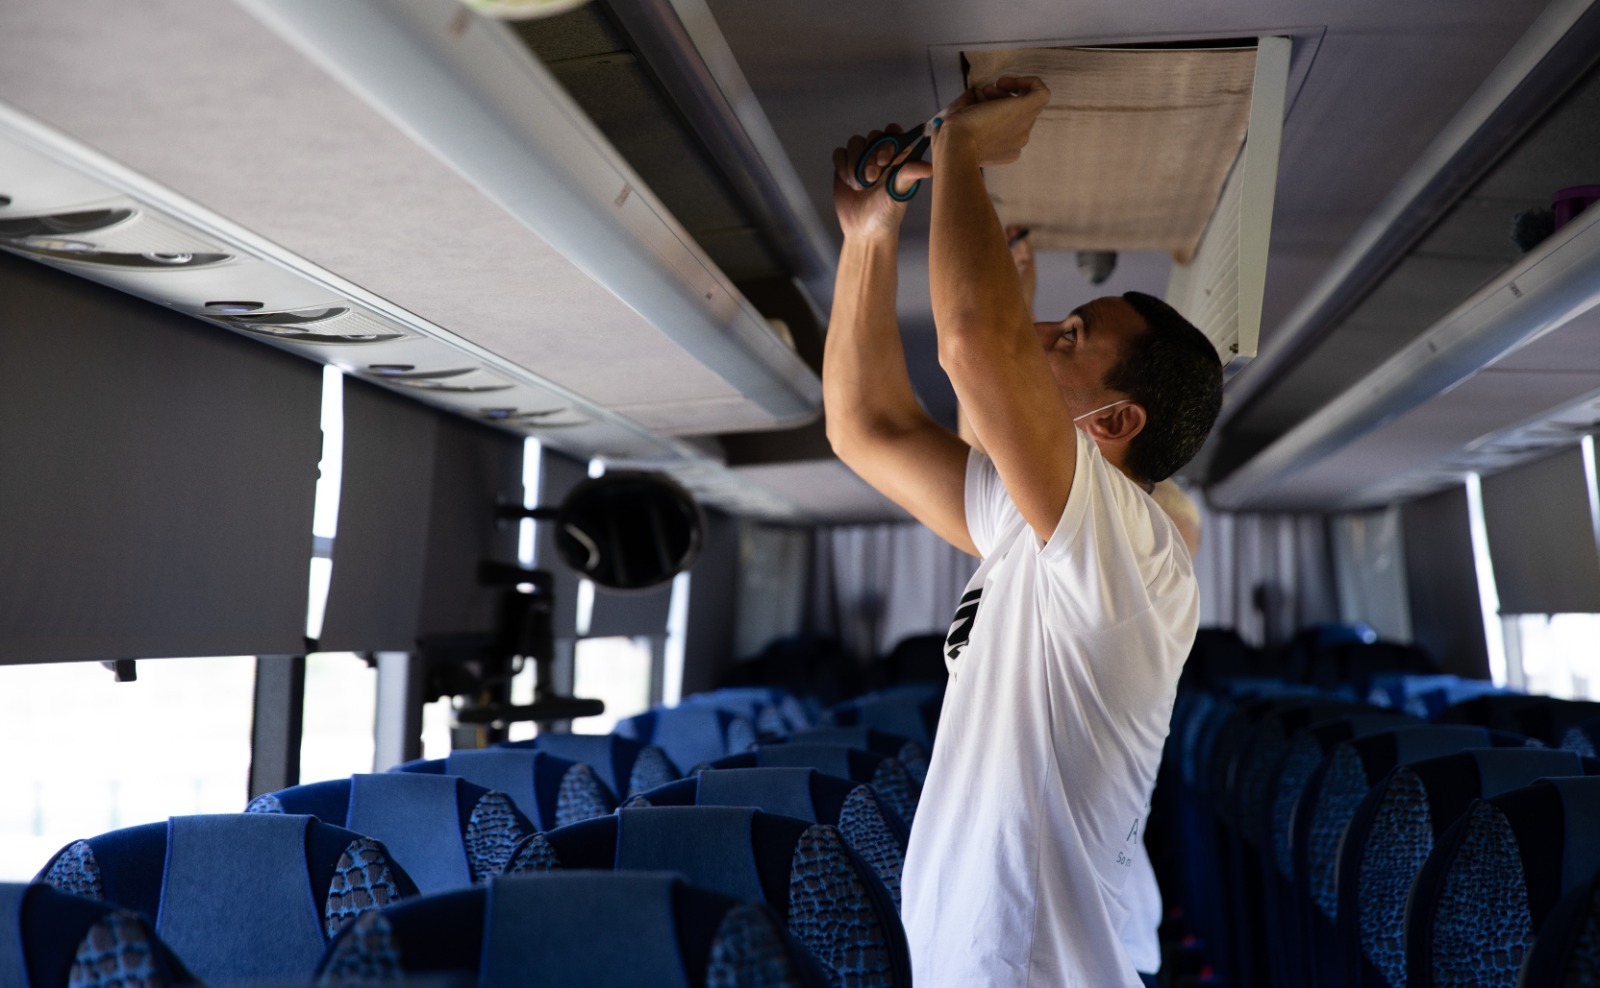 IN-EX, a cabin air filter made from sonochemical coating technology, being installed in a public bus.